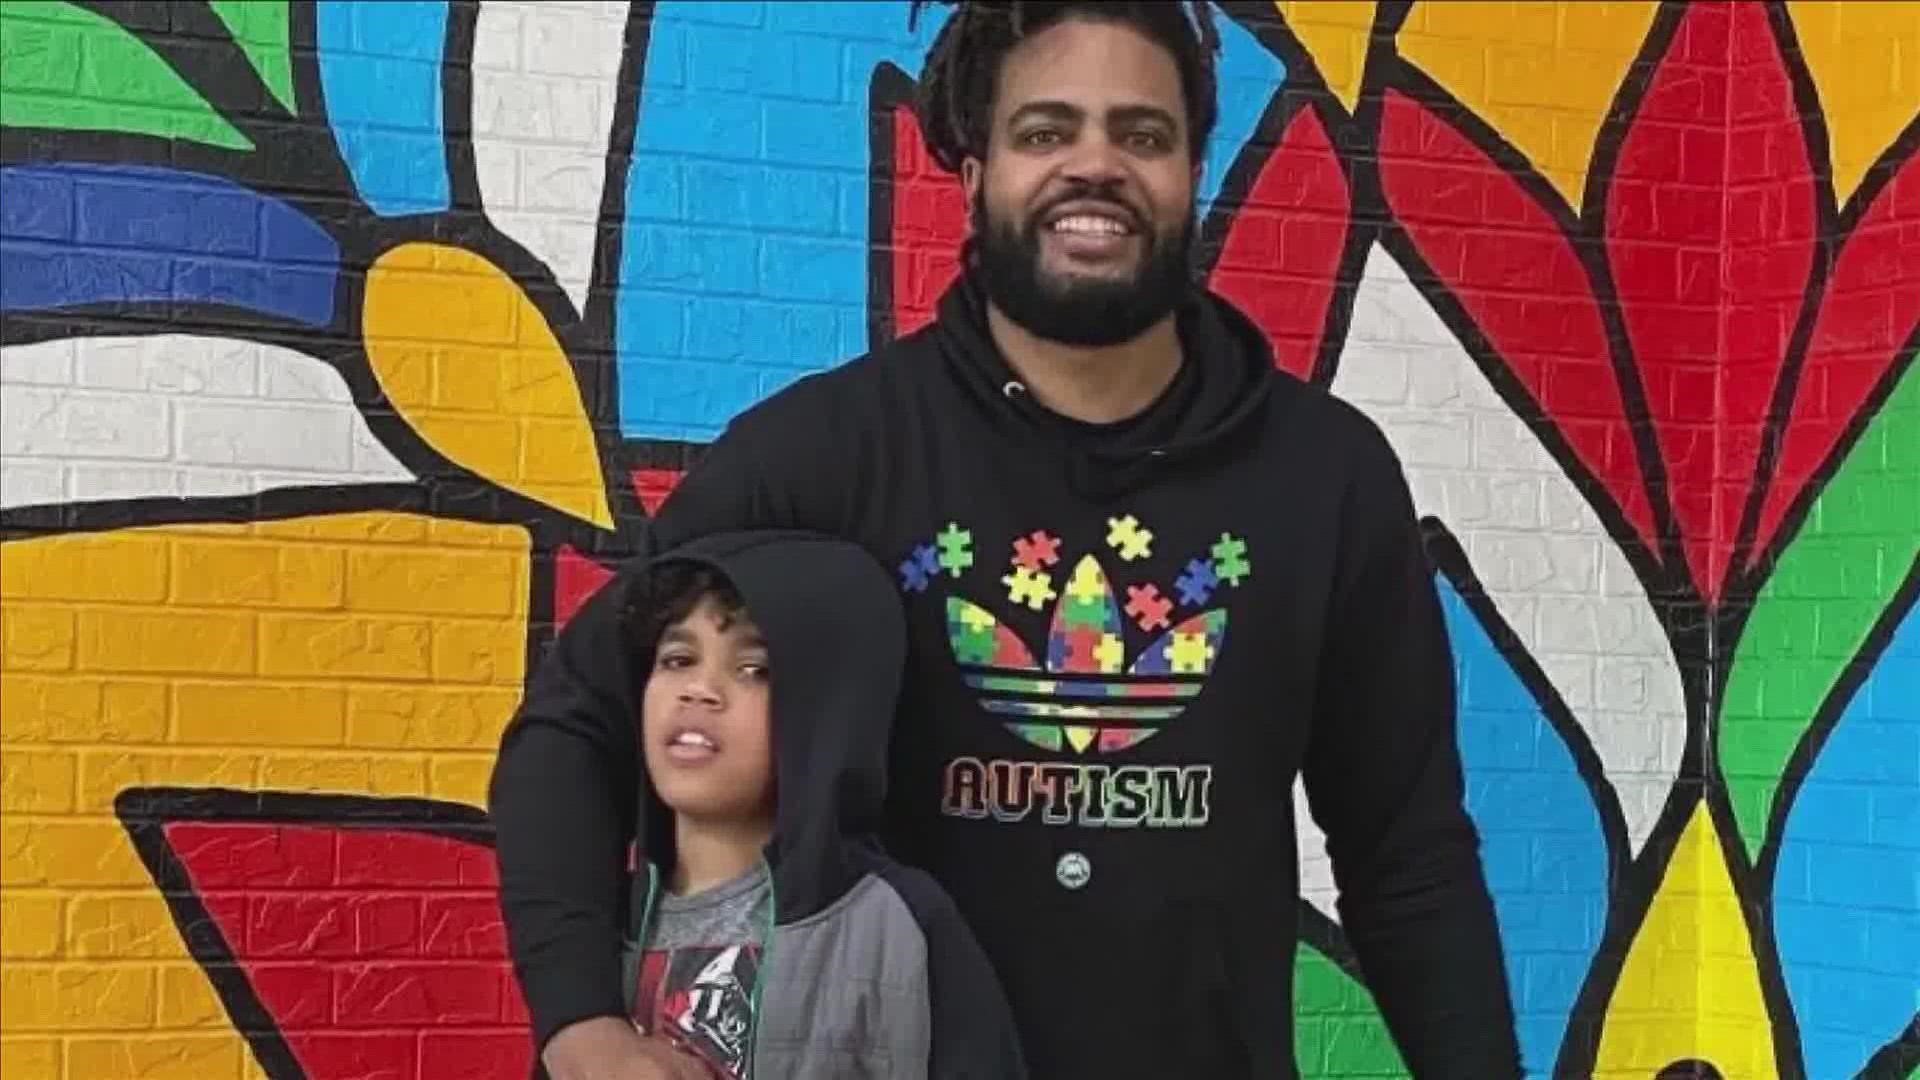 Kia Shine and his wife Queen Coleman decided to spread their stories to help other families with autism.